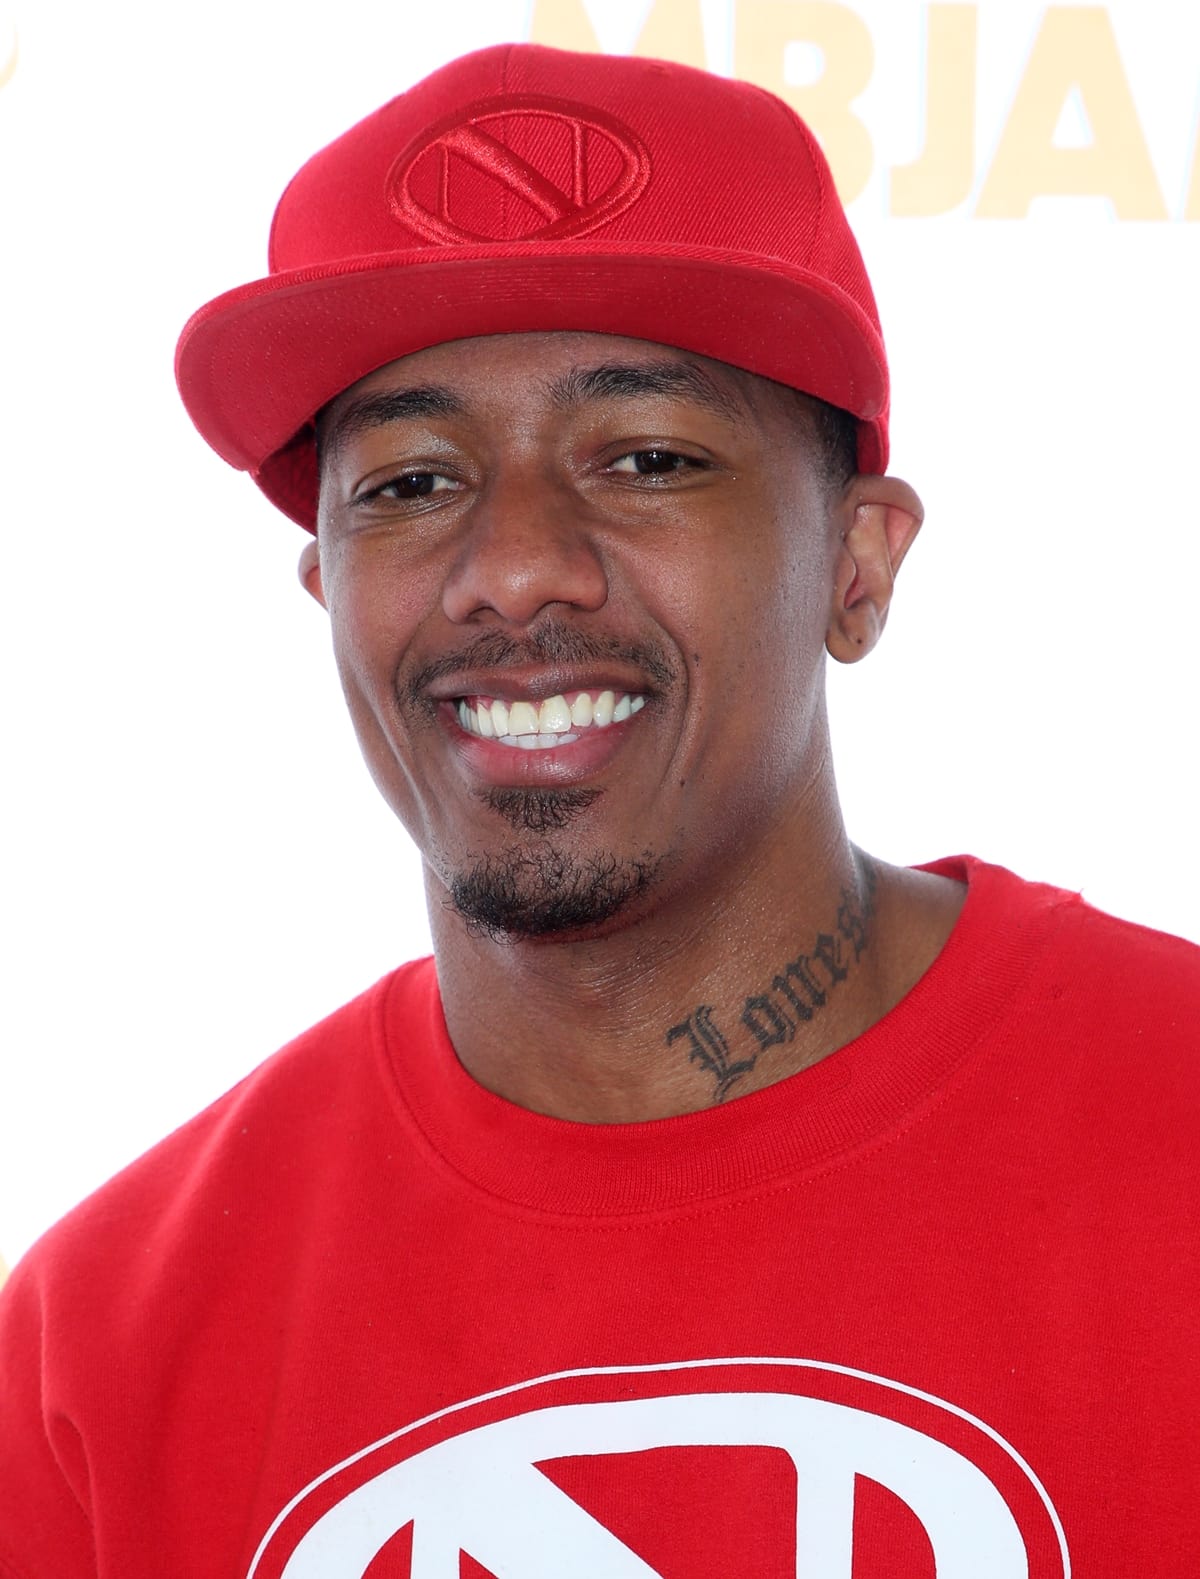 Nick Cannon has fathered four children with three different women since December 2020